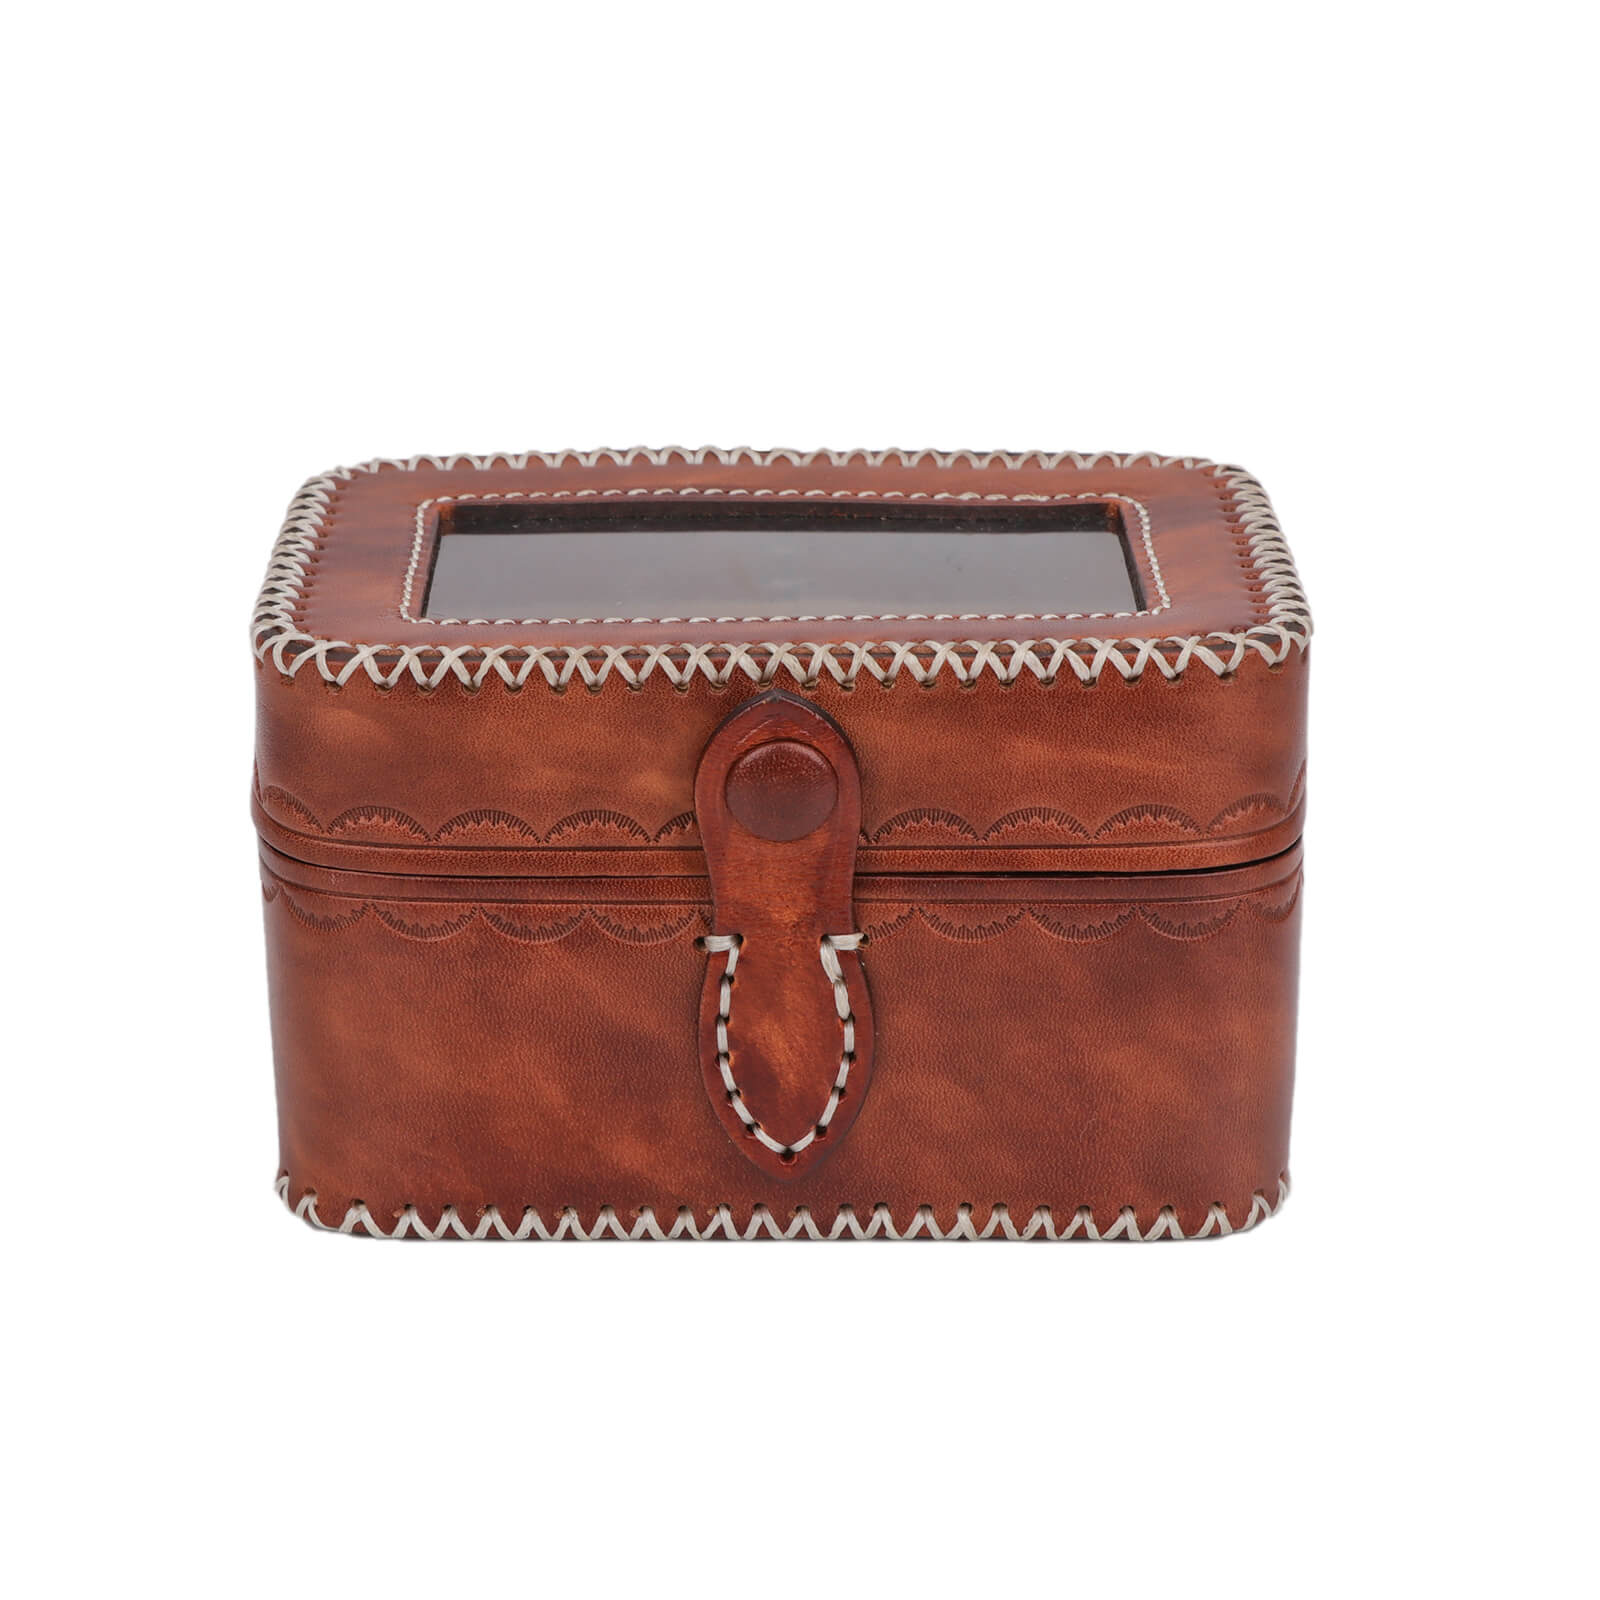 leather travel watch case